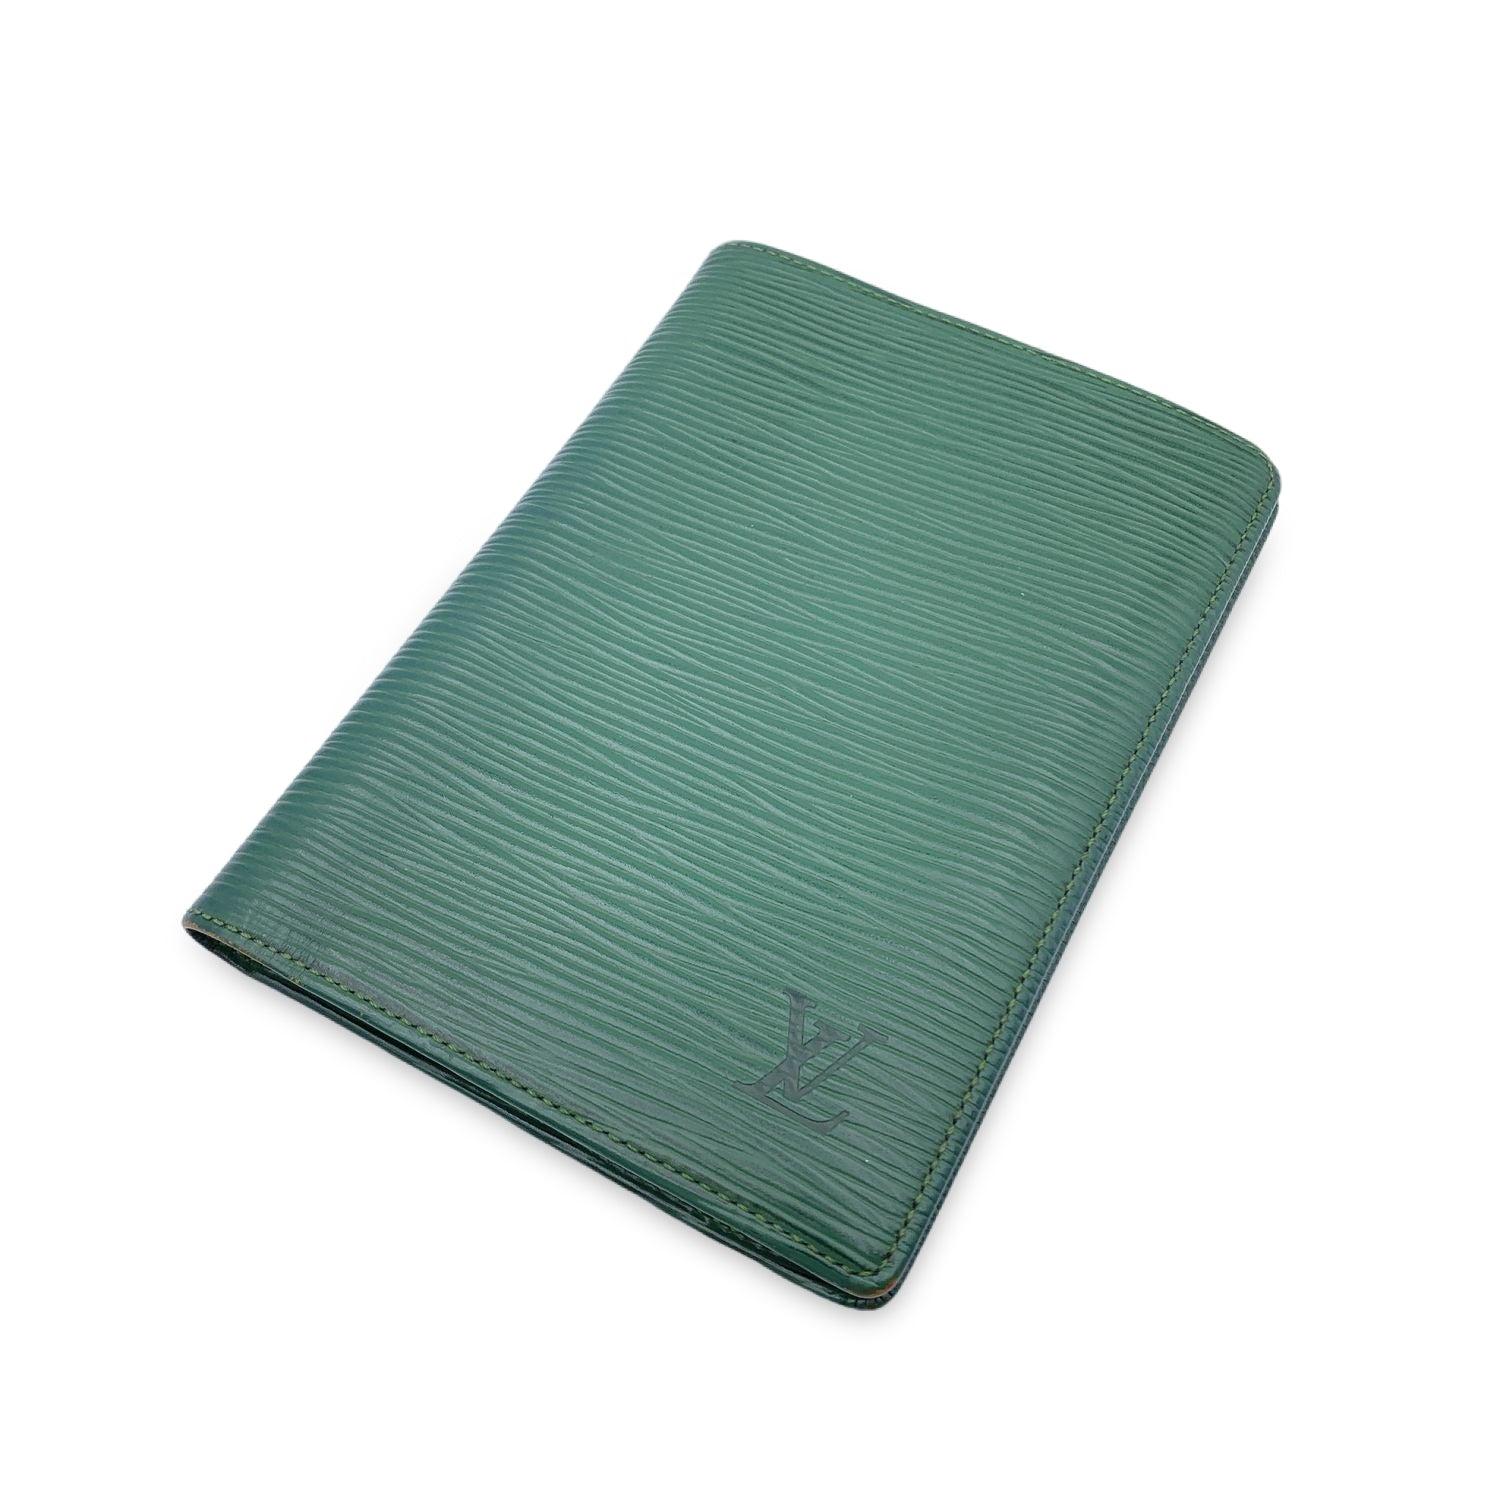 Passport holder in green epi leather by Louis Vuitton. Leather lining. Inside it has space for a passport, papers, documents, open pockets, 6 card slots and 1 bill compartments.'Louis Vuitton - Paris - Made in France'engraved inside. Data code